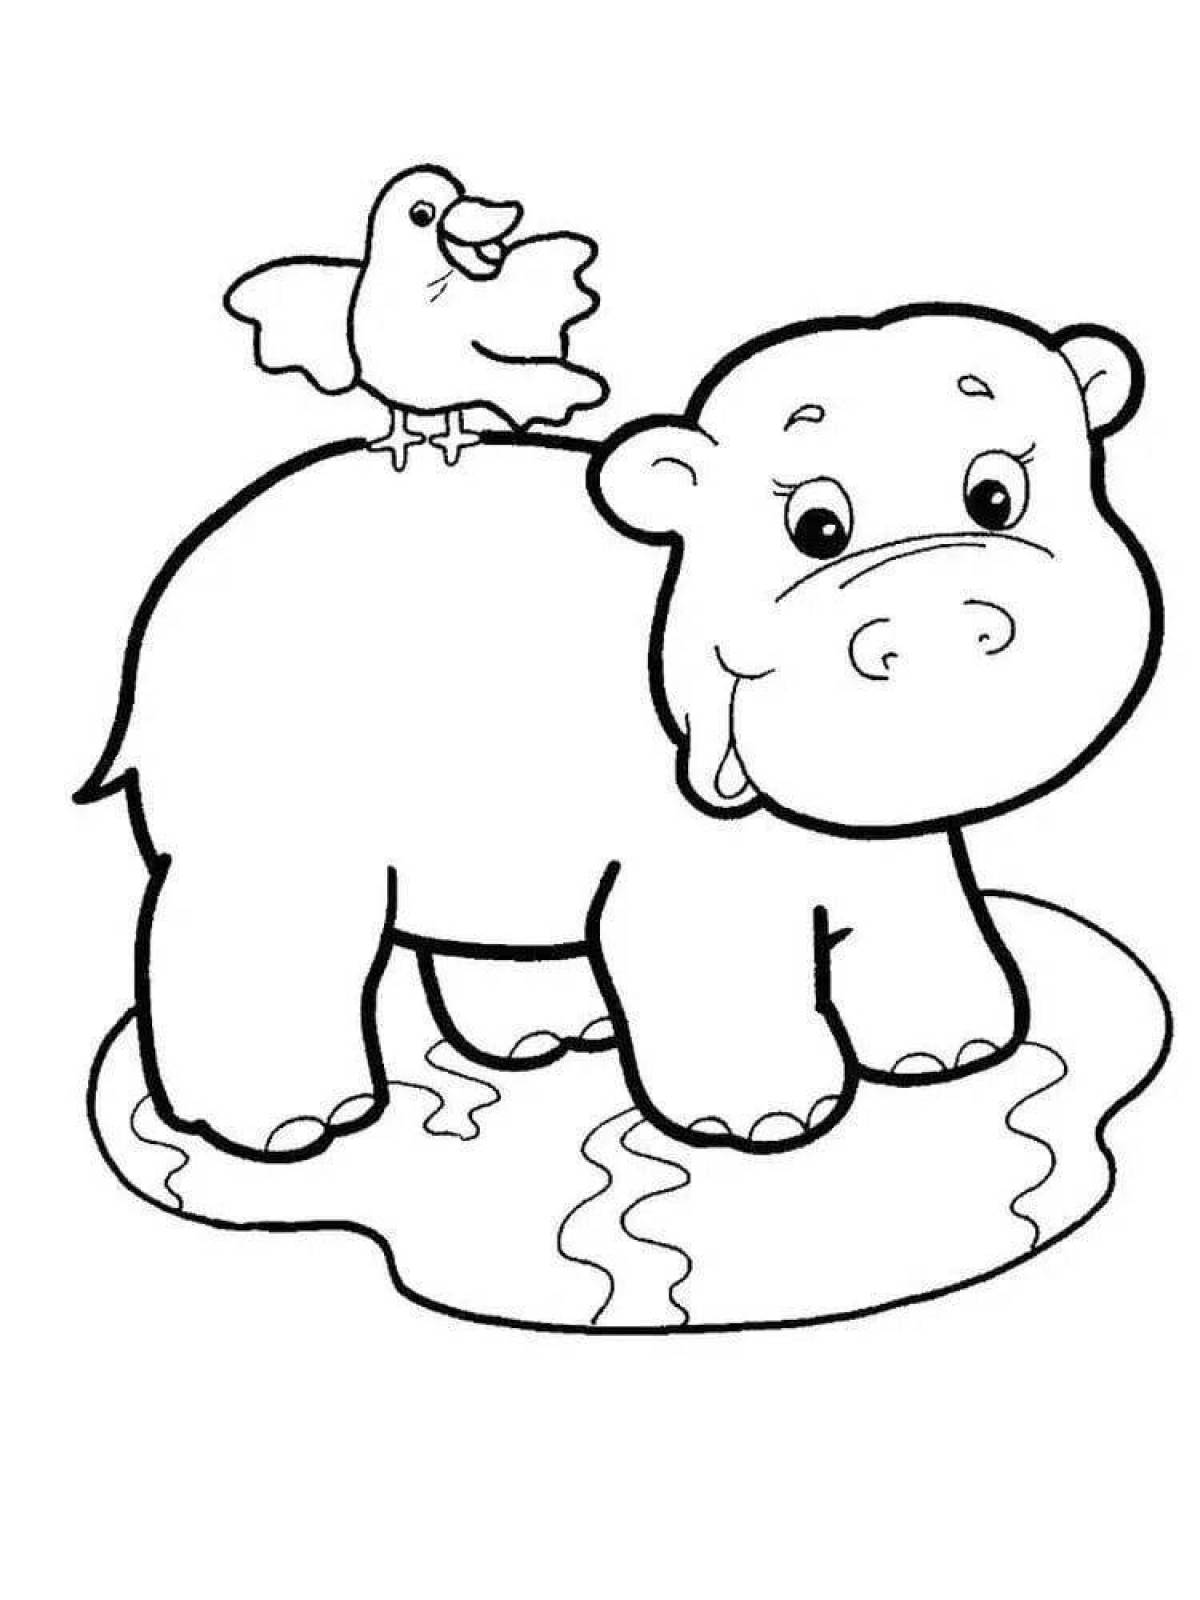 Fluffy animal coloring pages